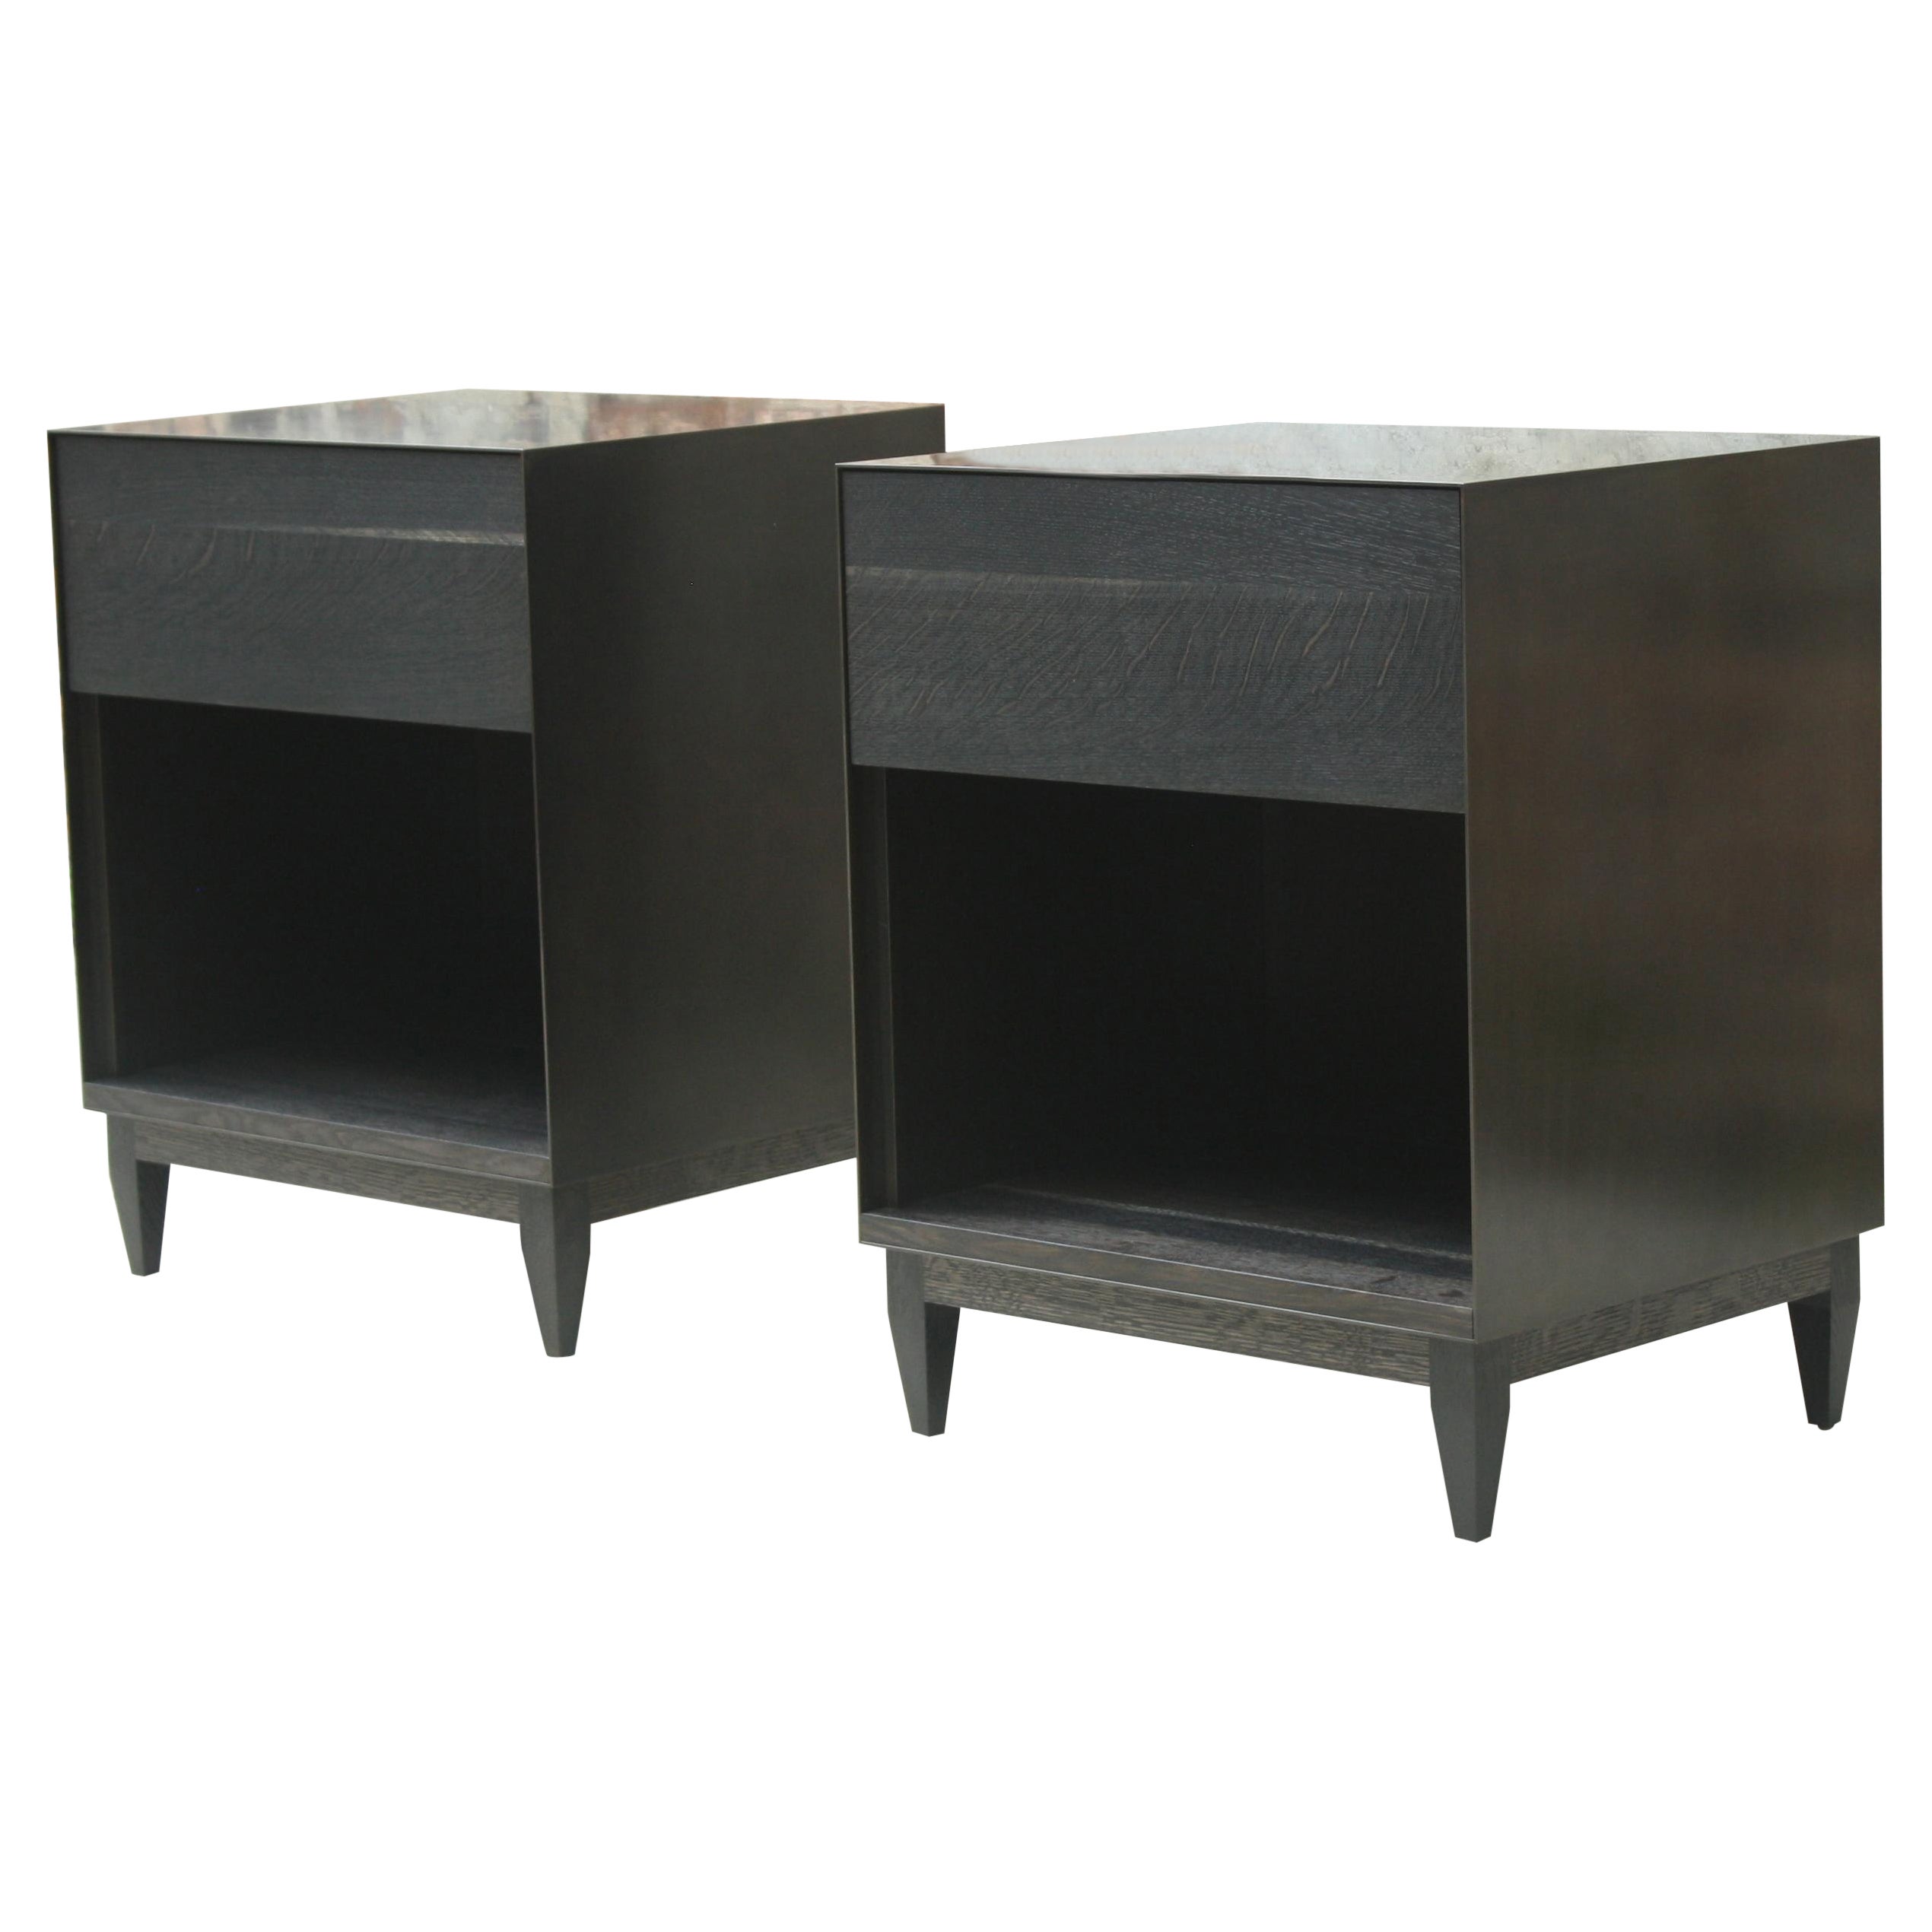 Oxide Matching Side Cabinets Handmade by Laylo Studio in Oak and Blackened Steel For Sale